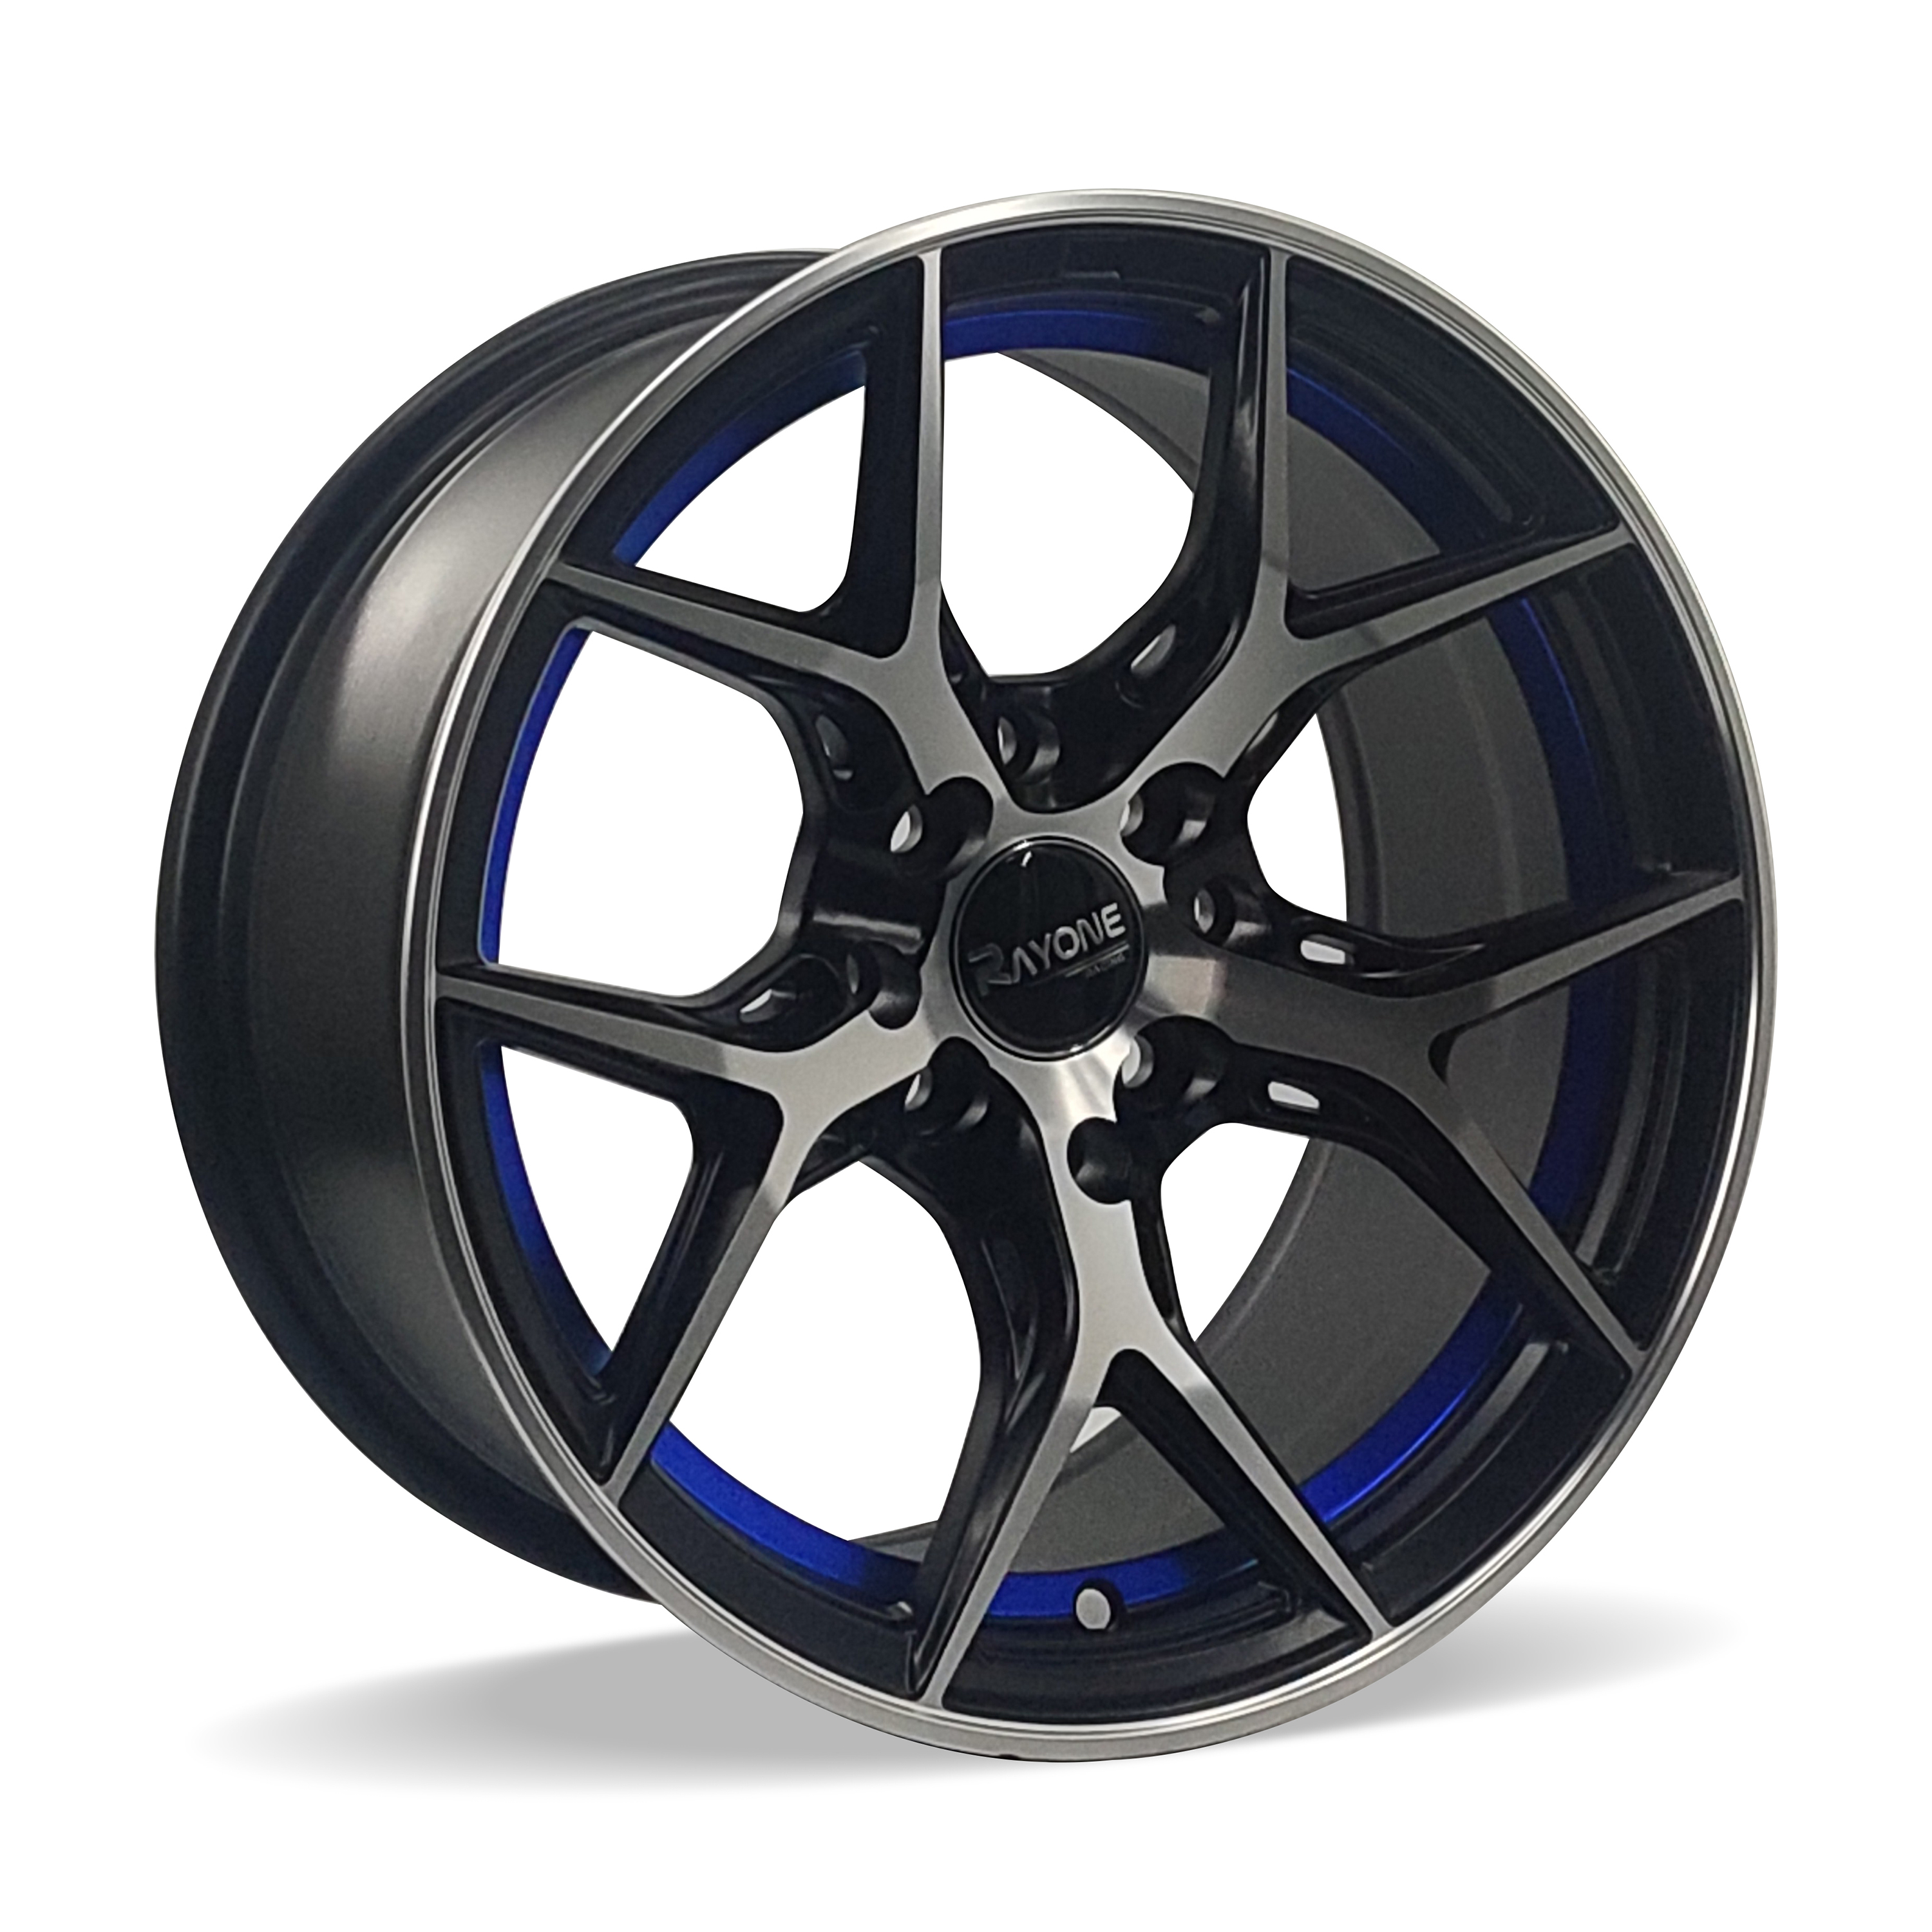 Rayone Wheels 15inch 7.5J Black Machine Face With Blue Undercut Reliable Alloy Wheels Suppliers